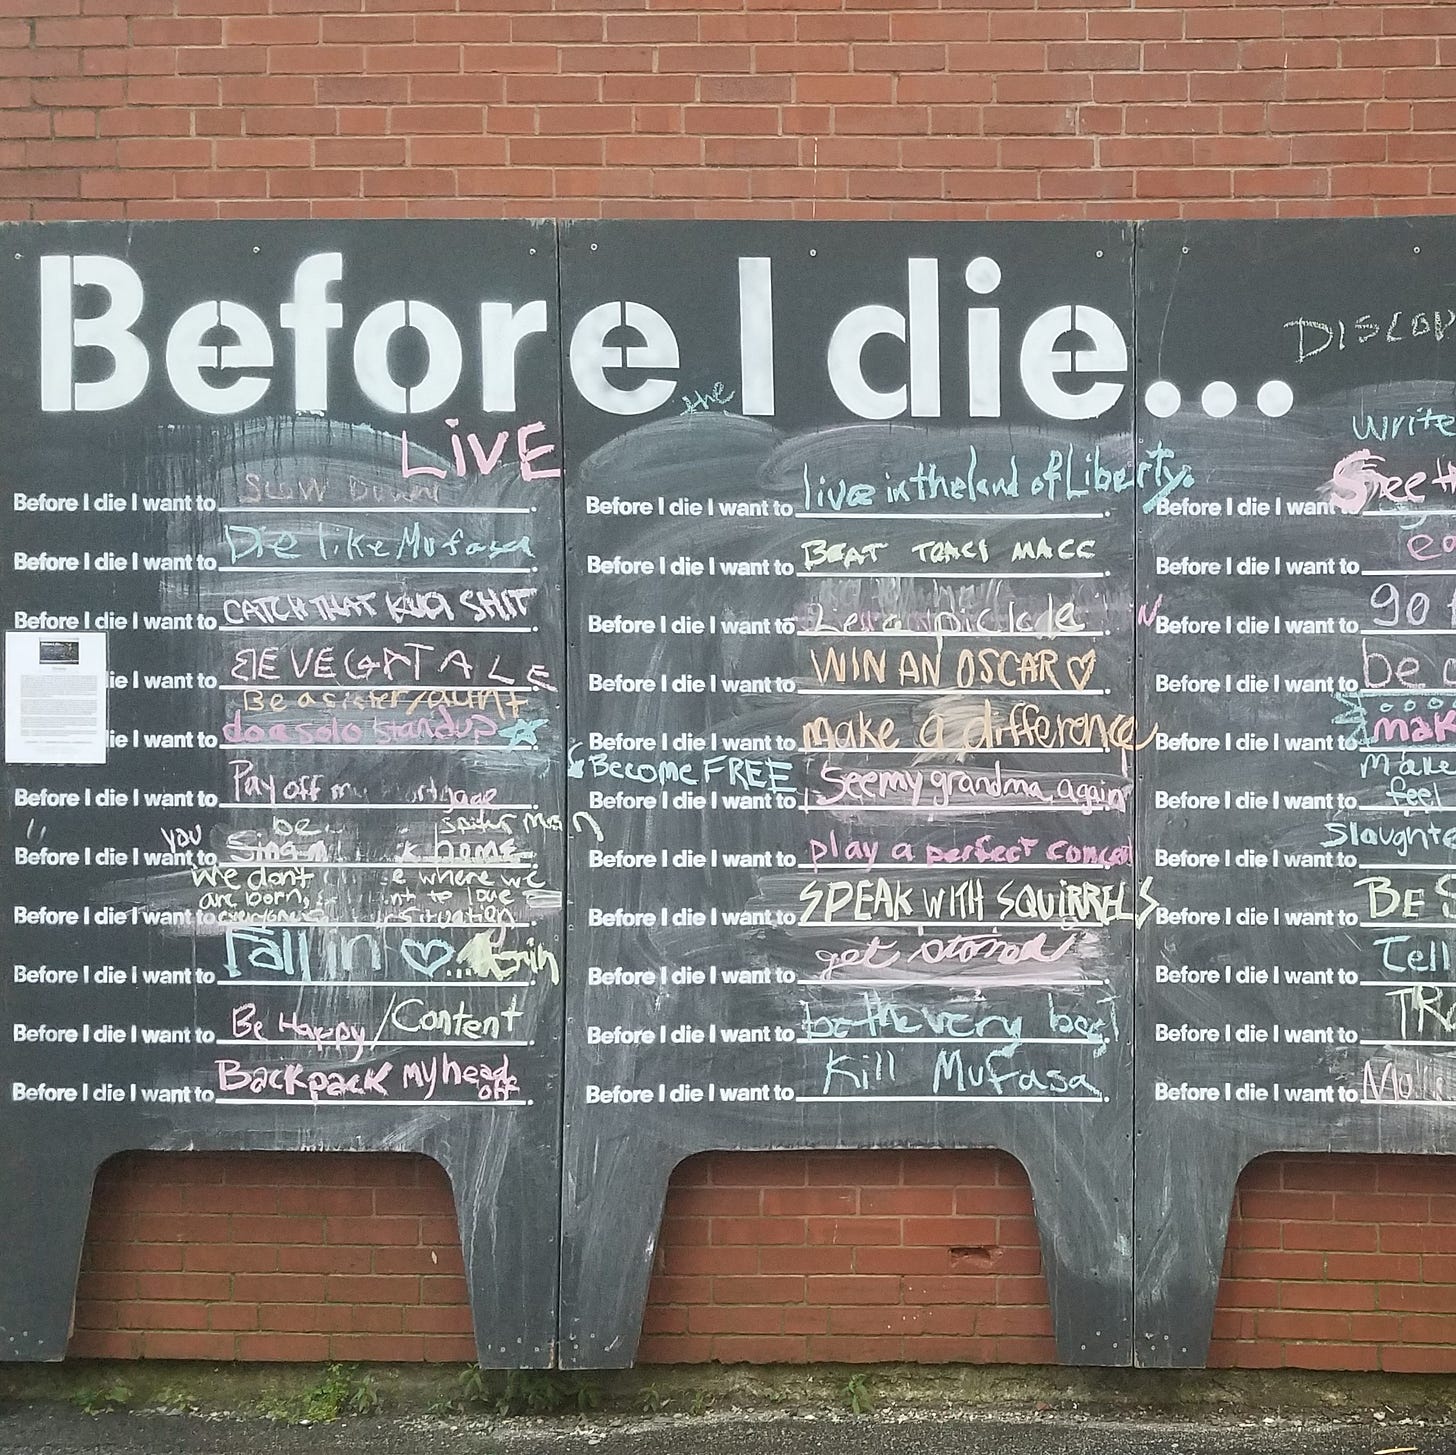 Blackboard art installation against a brick building. The heading says "Before I die" and people have written filled in the prompt with their ideas.